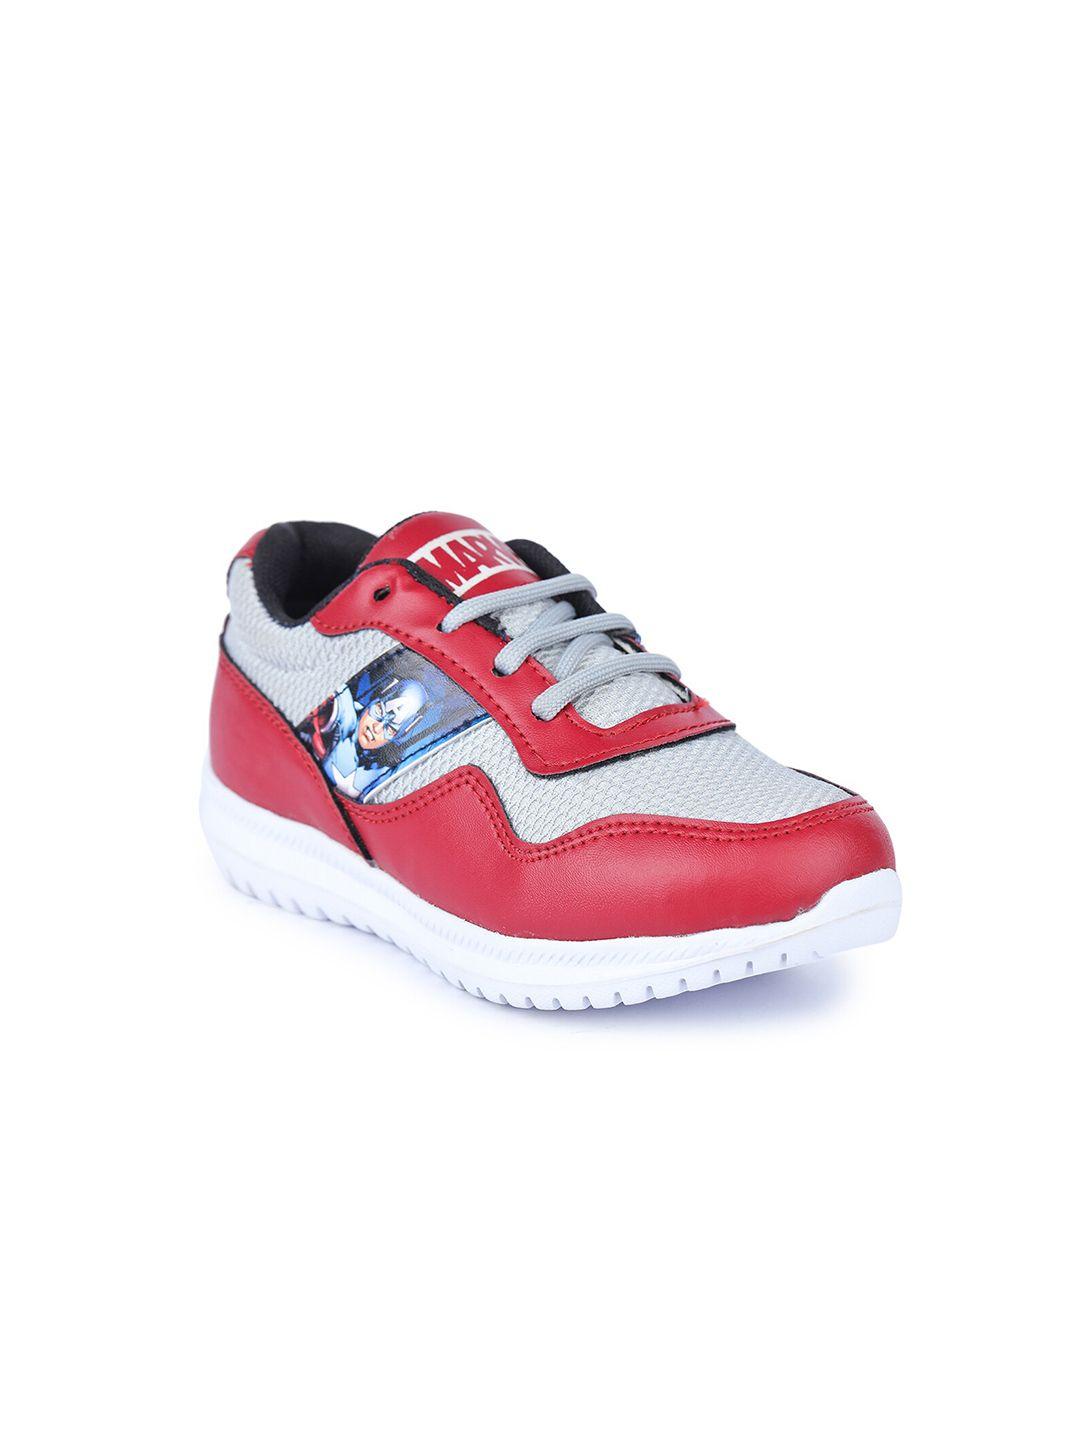 toothless boys red mesh walking shoes